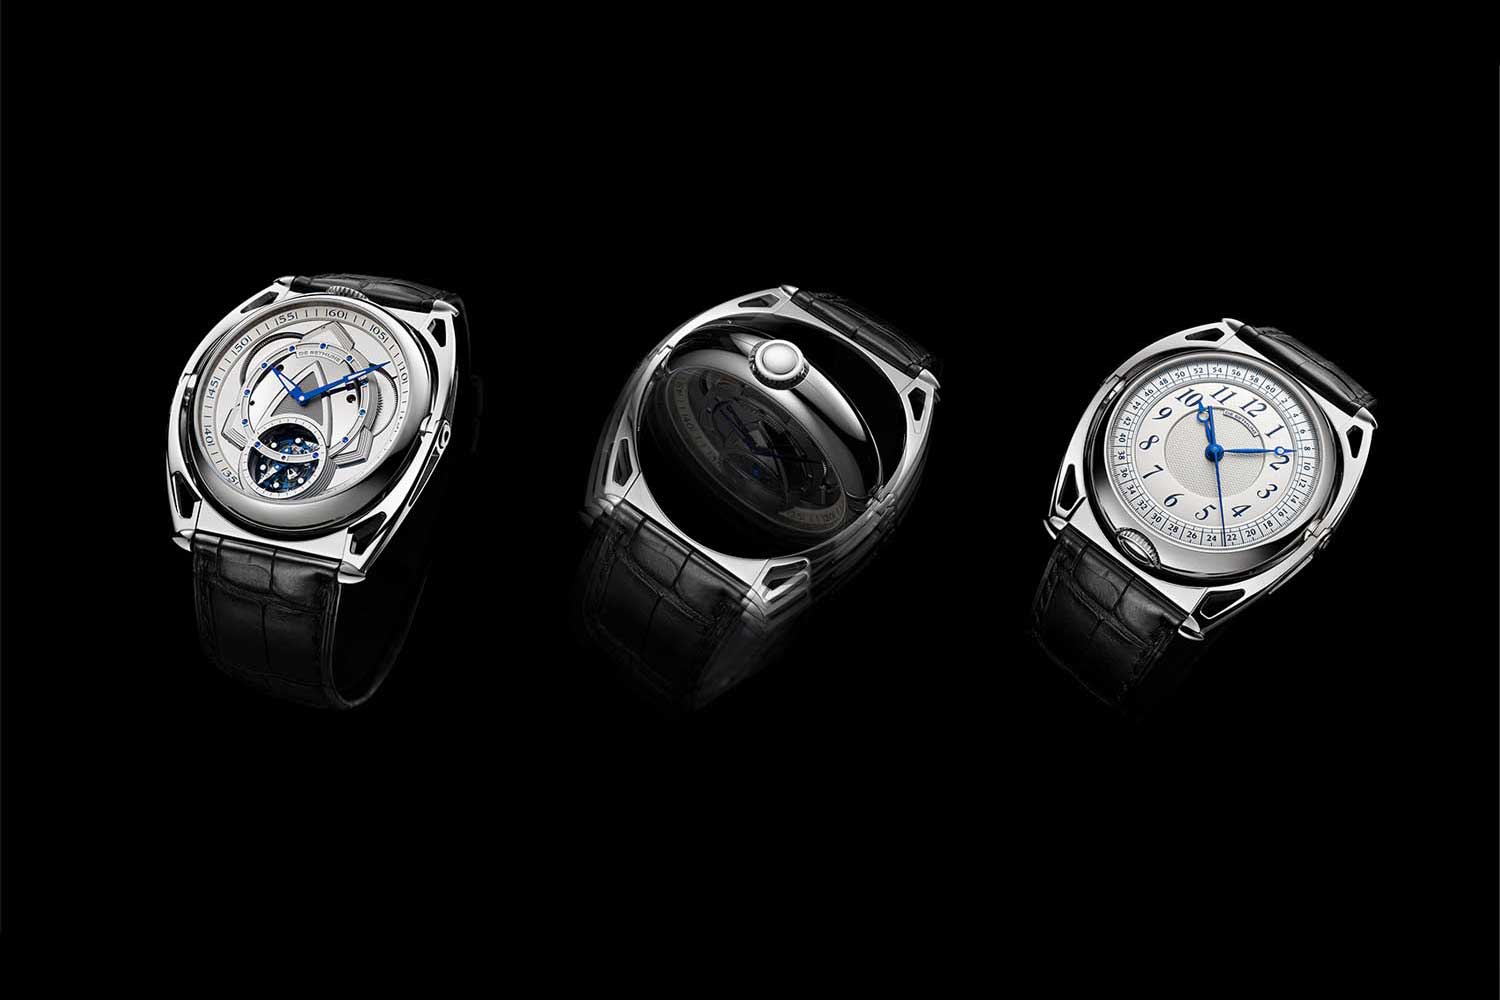 De Bethune introduced the two-sided De Bethune DB Kind of Two Tourbillon earlier this year. The watch transforms between it's two faces along an axis on the articulating lugs of the timepiece